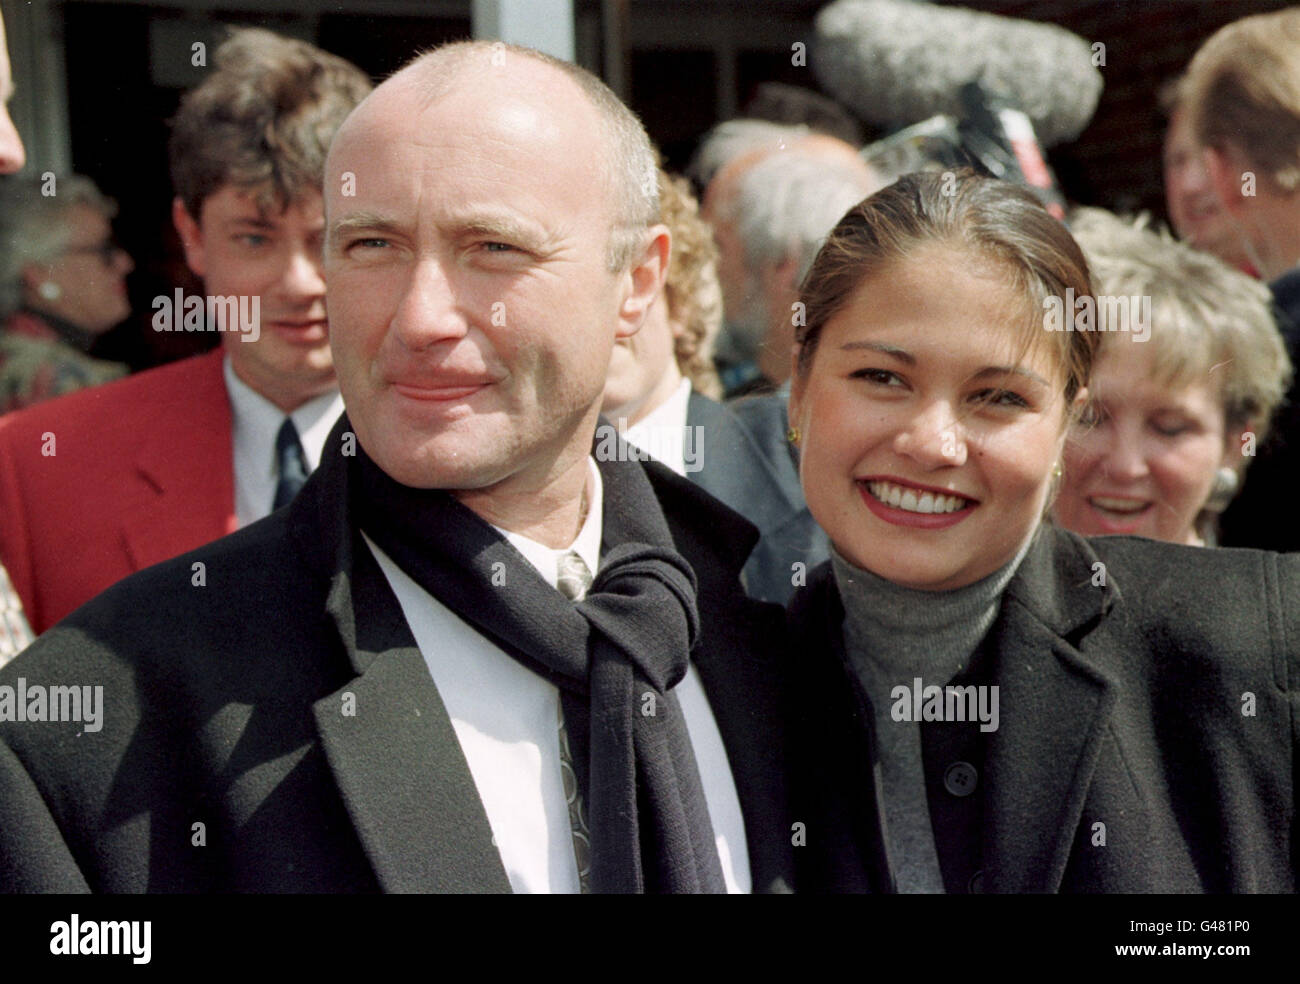 Rock star and actor Phil Collins, who is President of Comic Heritage, and girlfriend Orianne Cevey at the unveiling of the blue plaque in memory of the comic stars at Teddington. 22/7/99: Collins to marry Cevey the weekend of 24/7/99 in Lausanne. Stock Photo